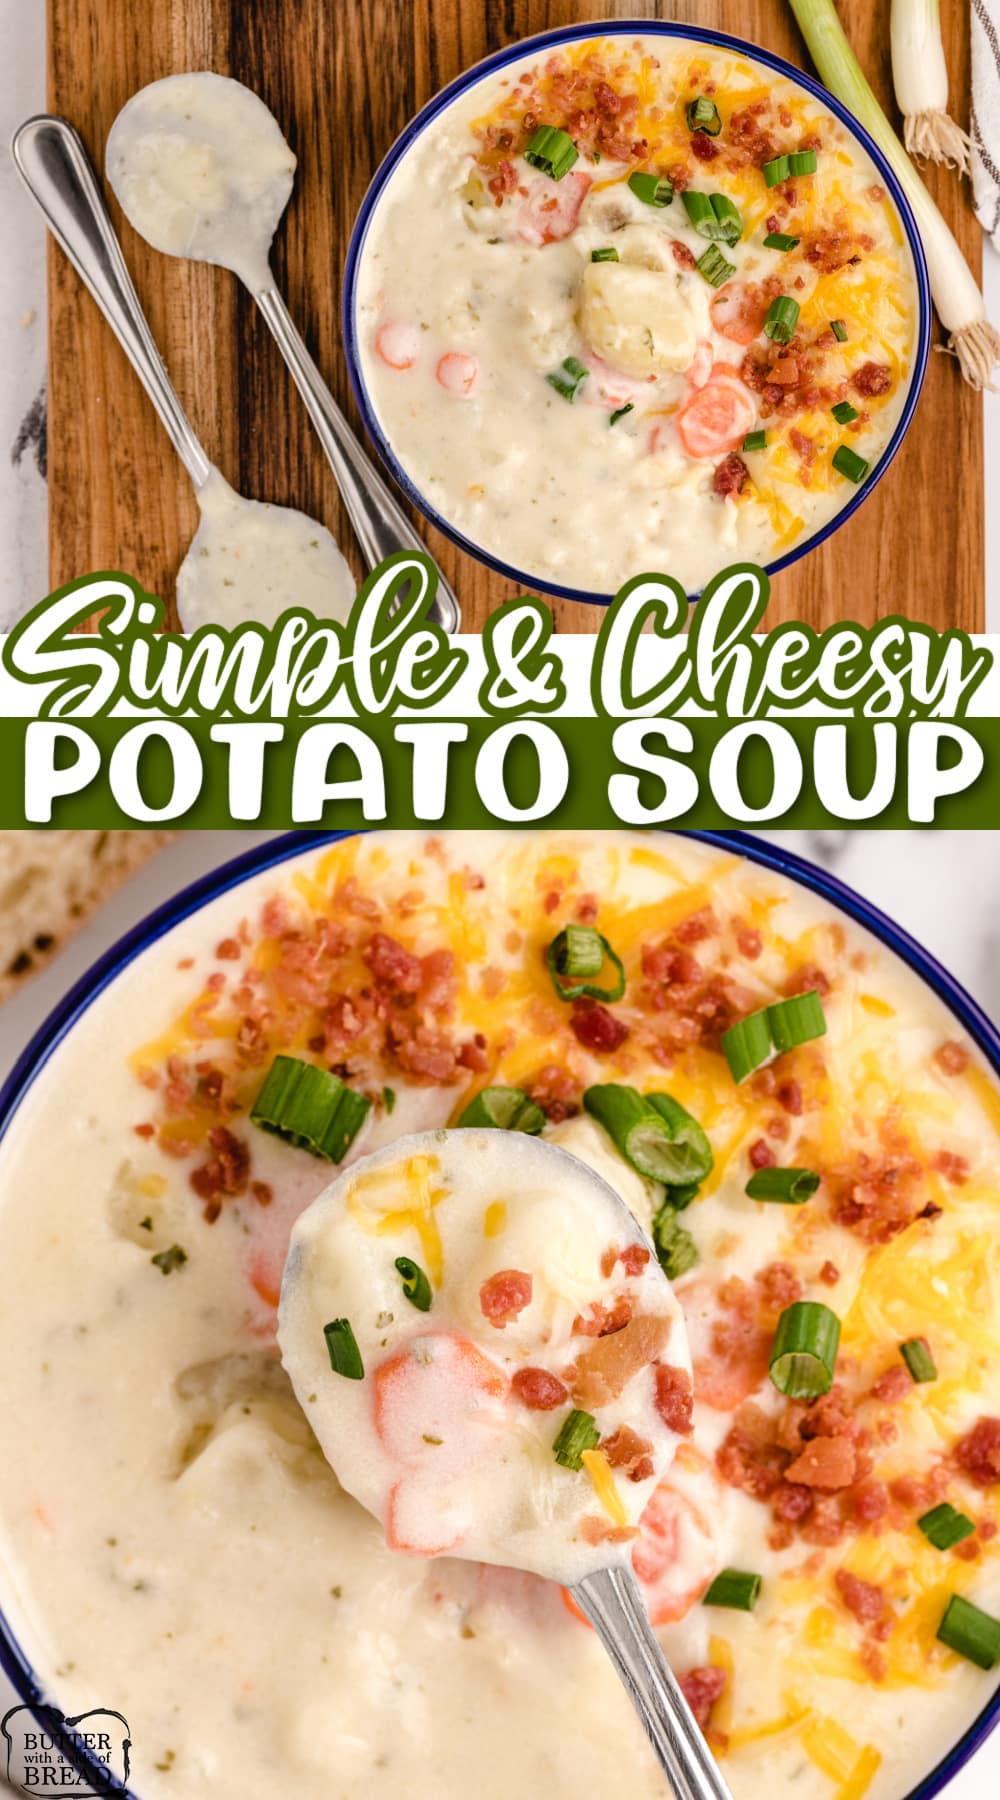 Cheesy Potato Soup made with onions, carrots, potatoes and cheese. Delicious potato cheese soup recipe that is so simple to make on the stove!